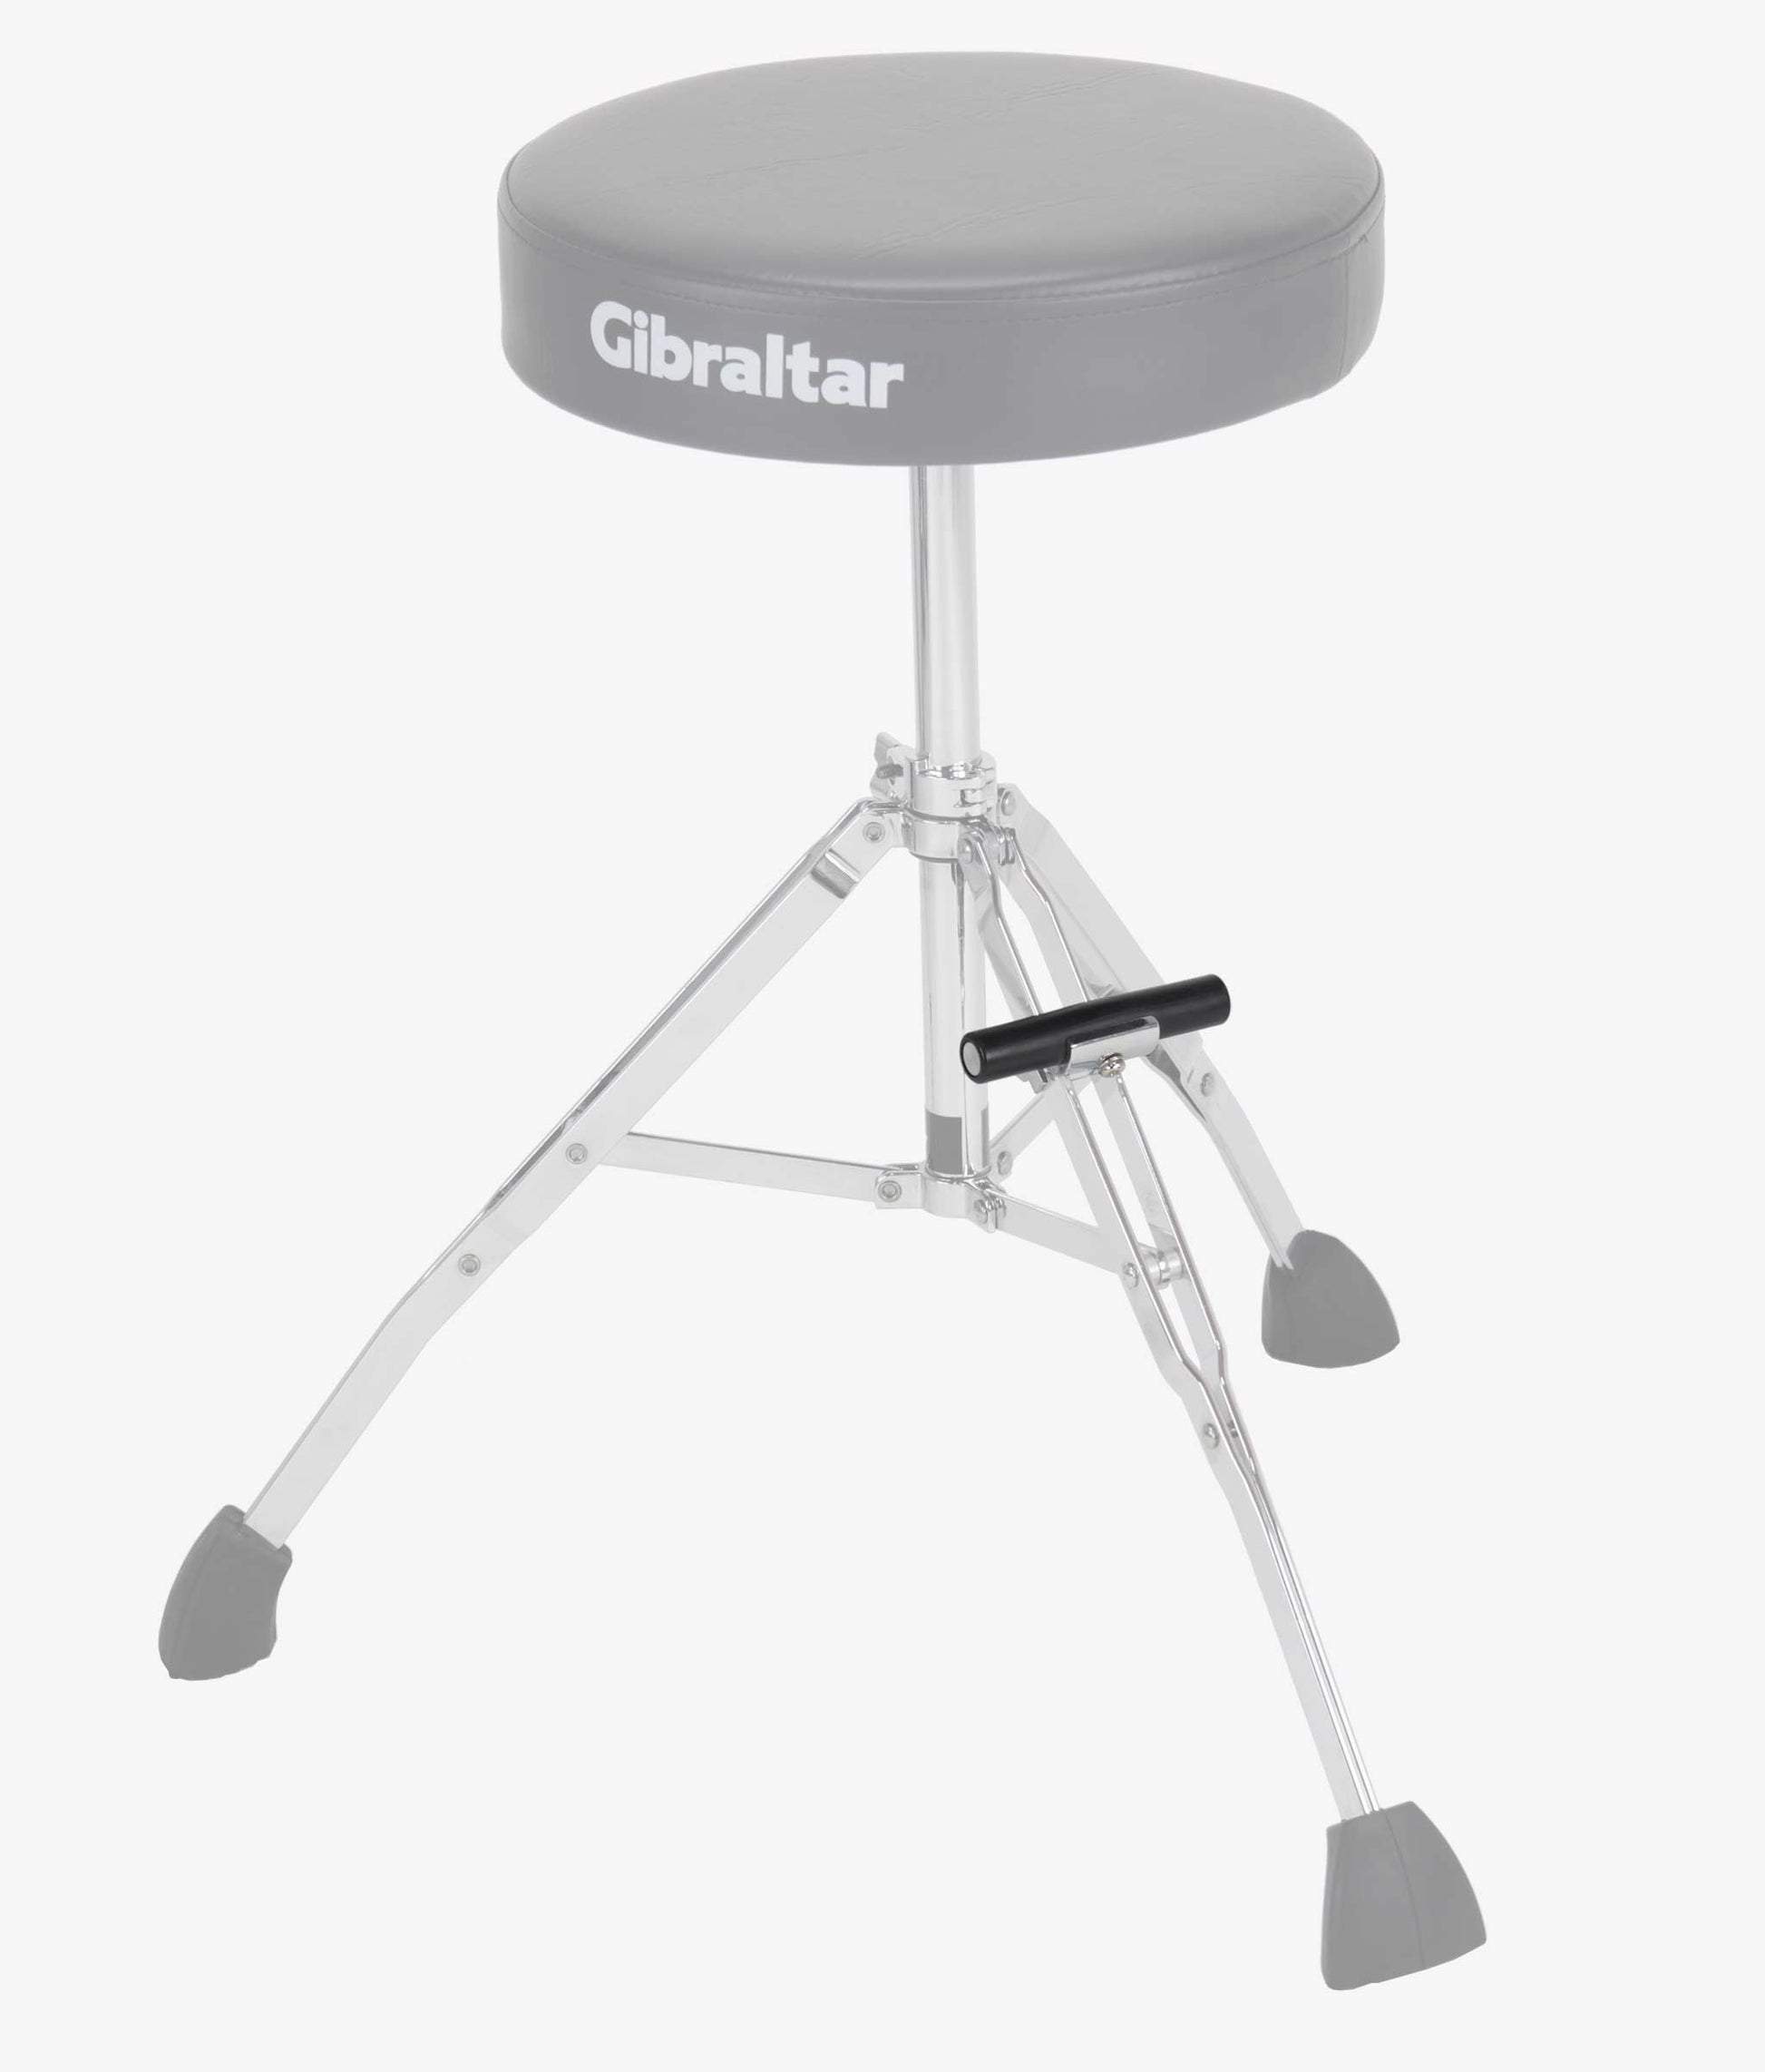  Gibraltar SC-GTFA Footrest for Compact Performance Stool Drum Accessories